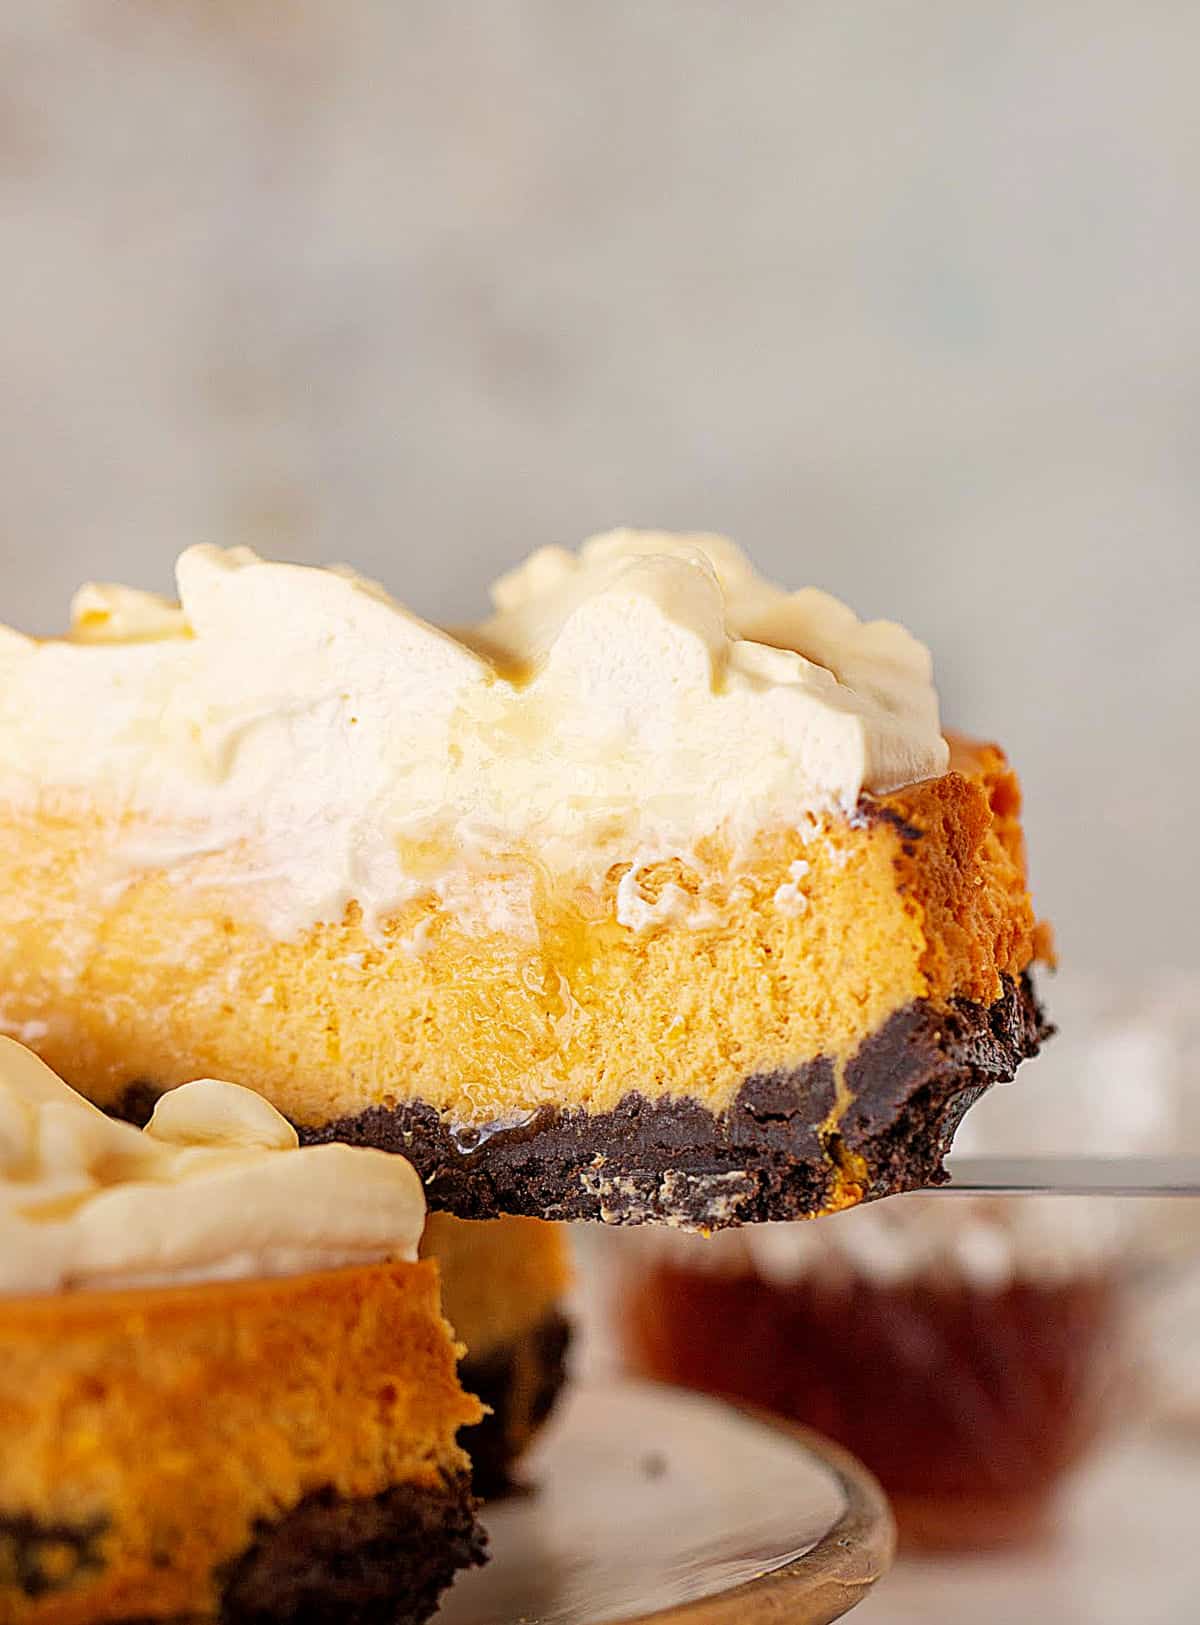 Slice of pumpkin cheesecake with whipped cream and chocolate crust being lifted from whole cake. Grey background.